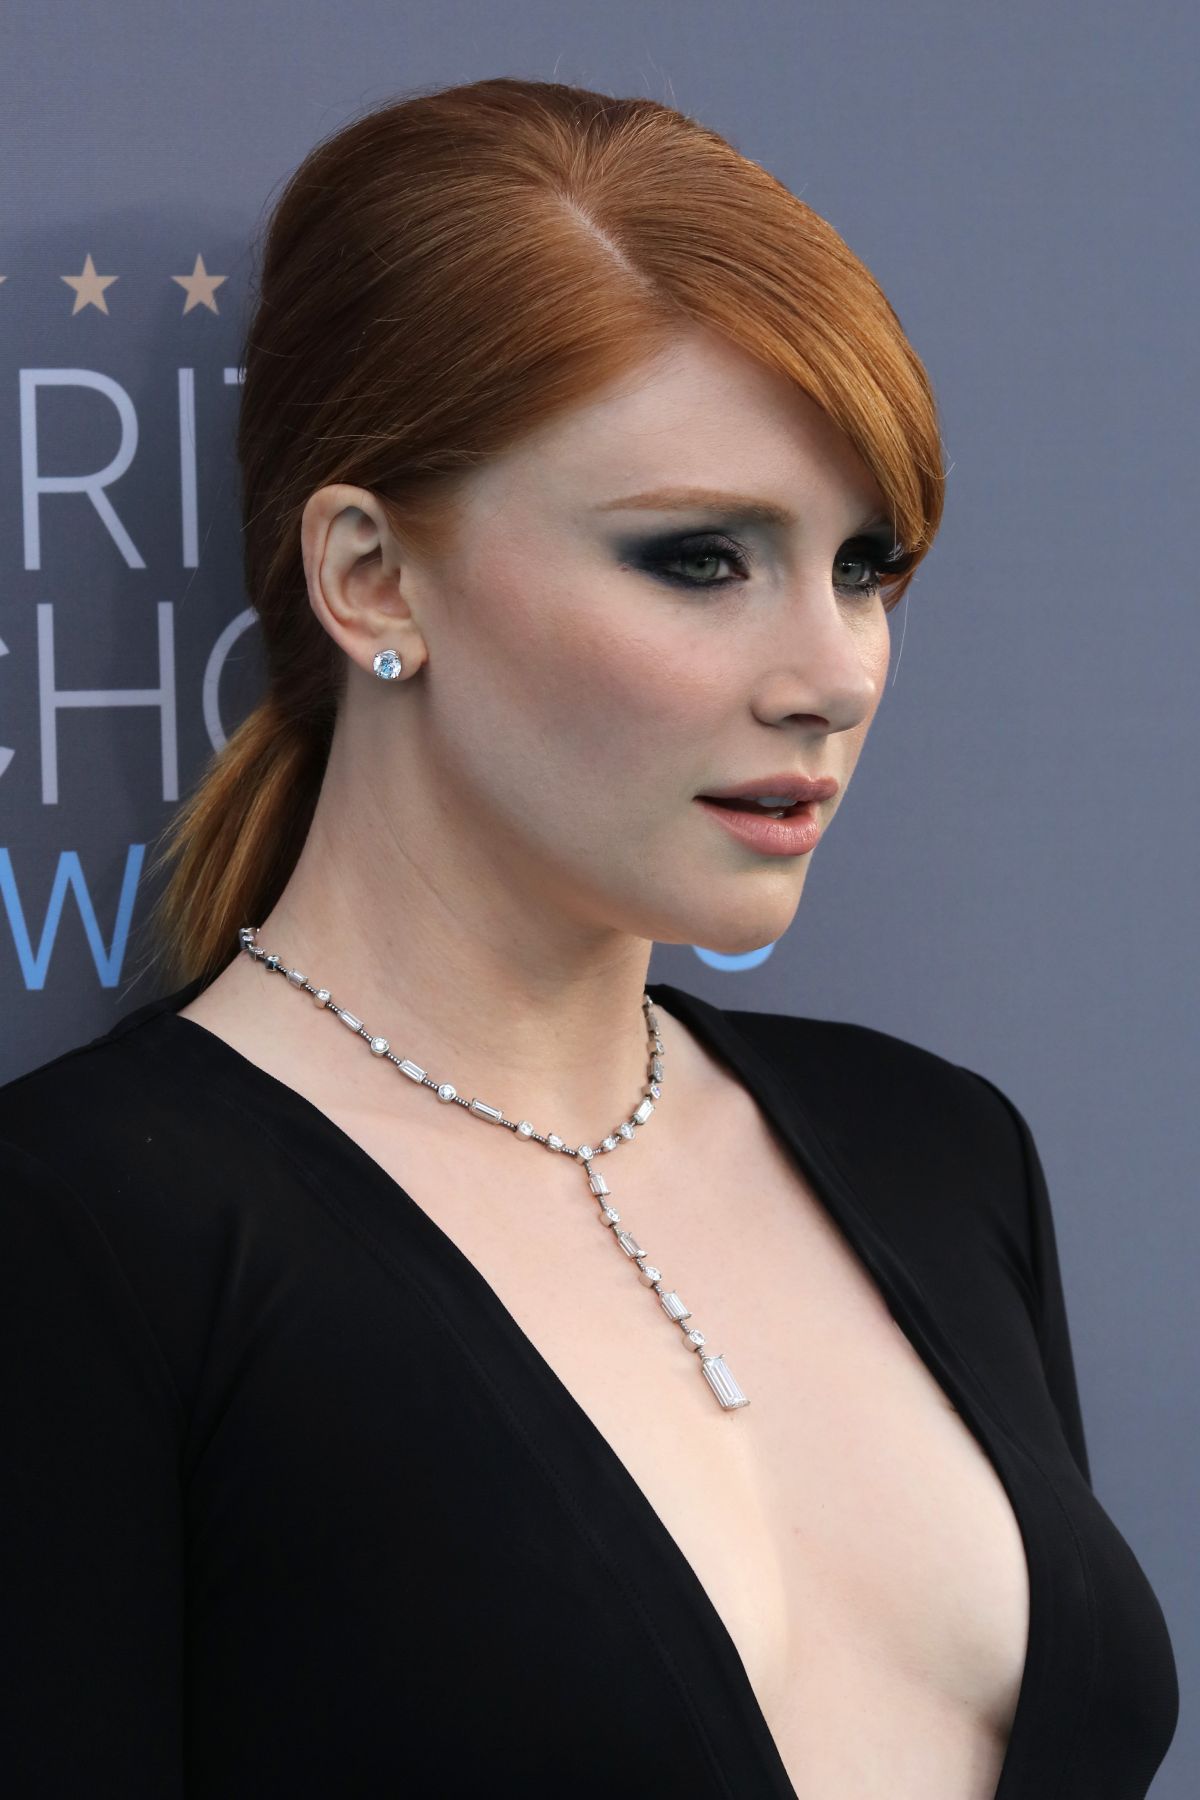 Redhead Celebs With Plunging Necklines